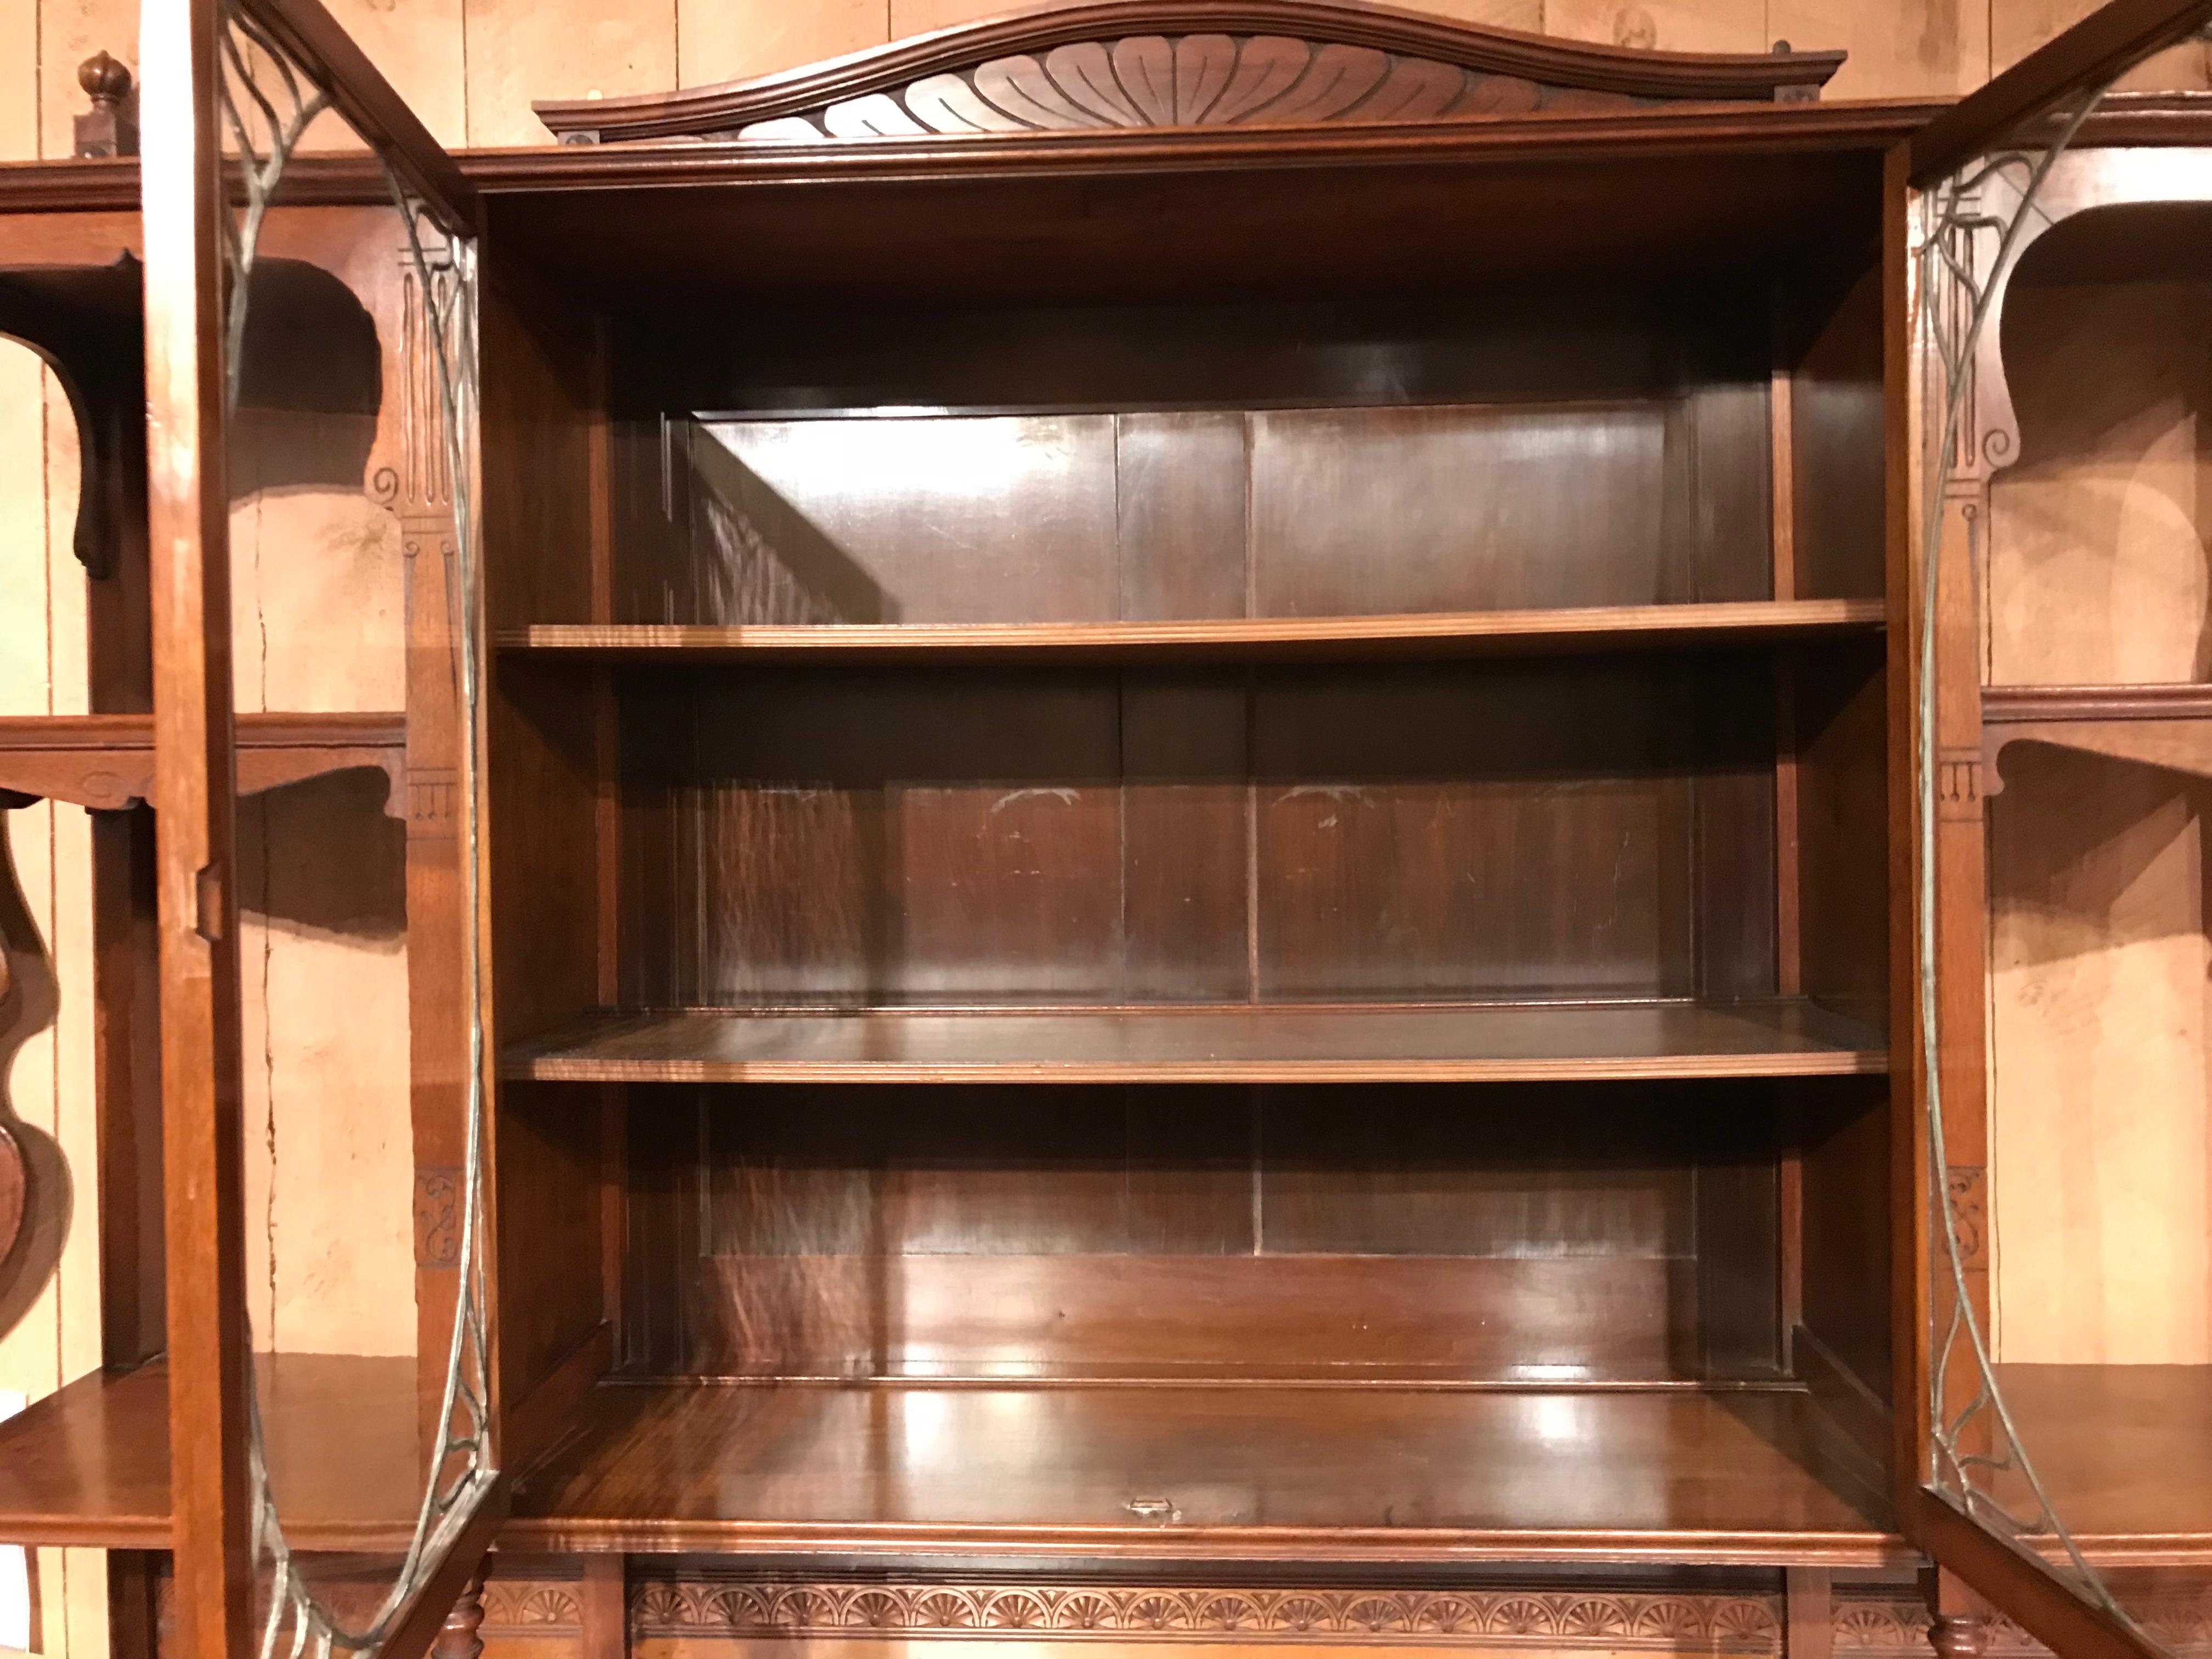 19th Century English Art Nouveau Walnut Étagère or Bookcase with Leaded Glass Doors